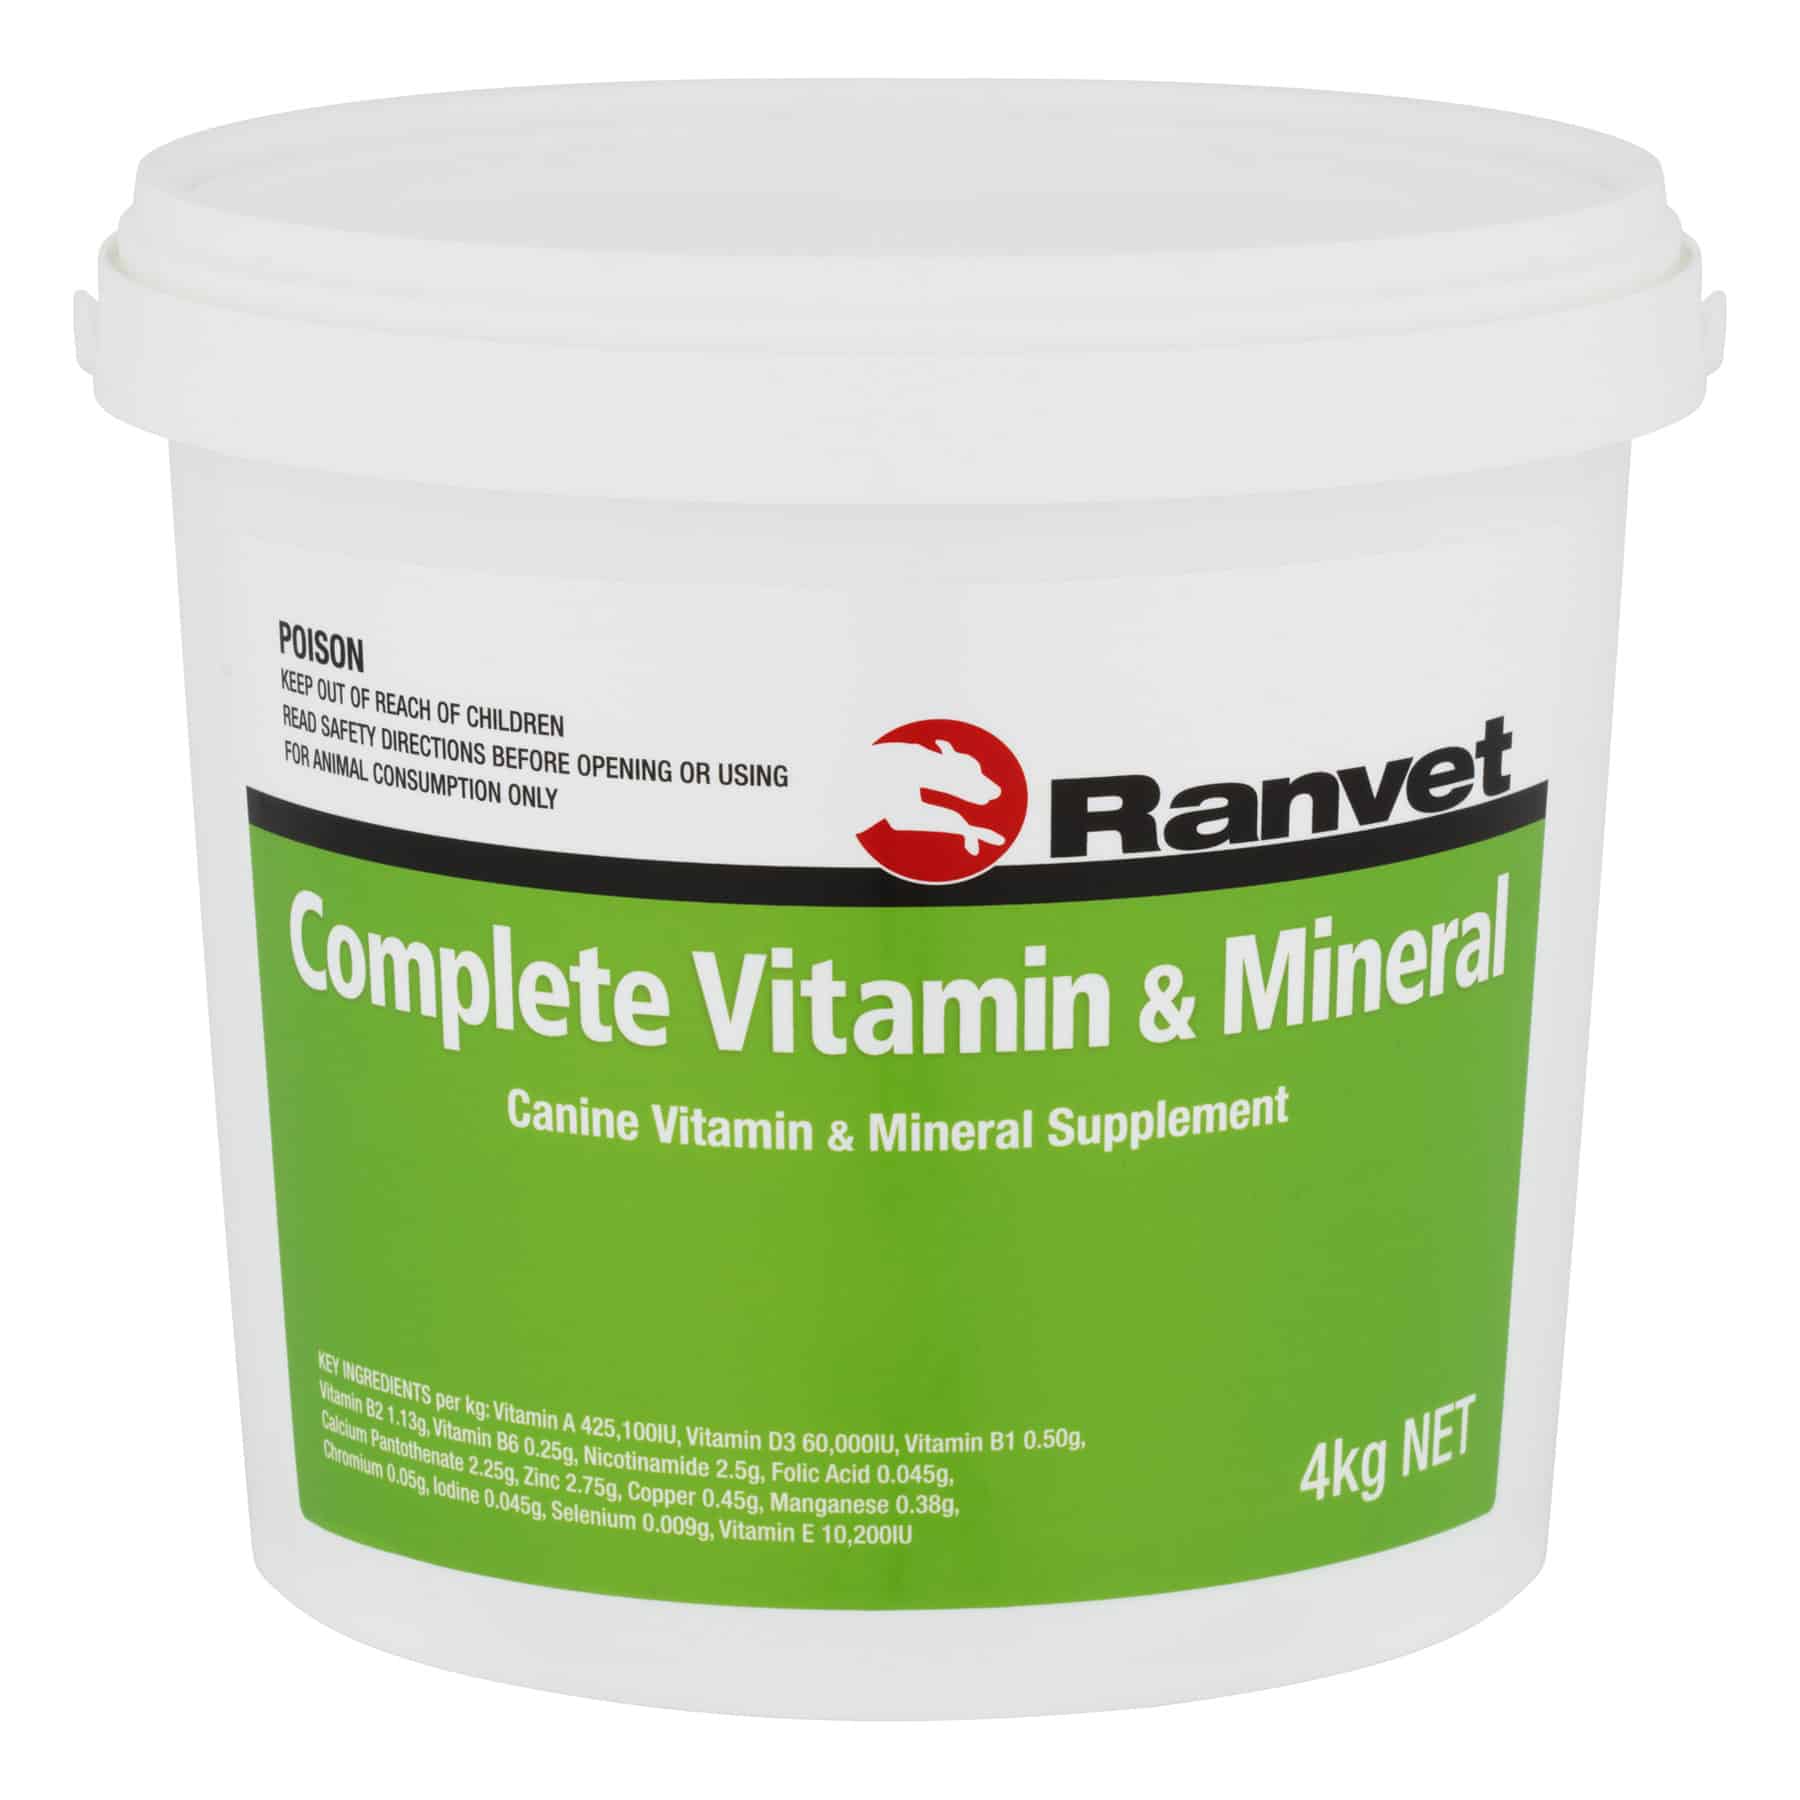 canine vitamins and minerals